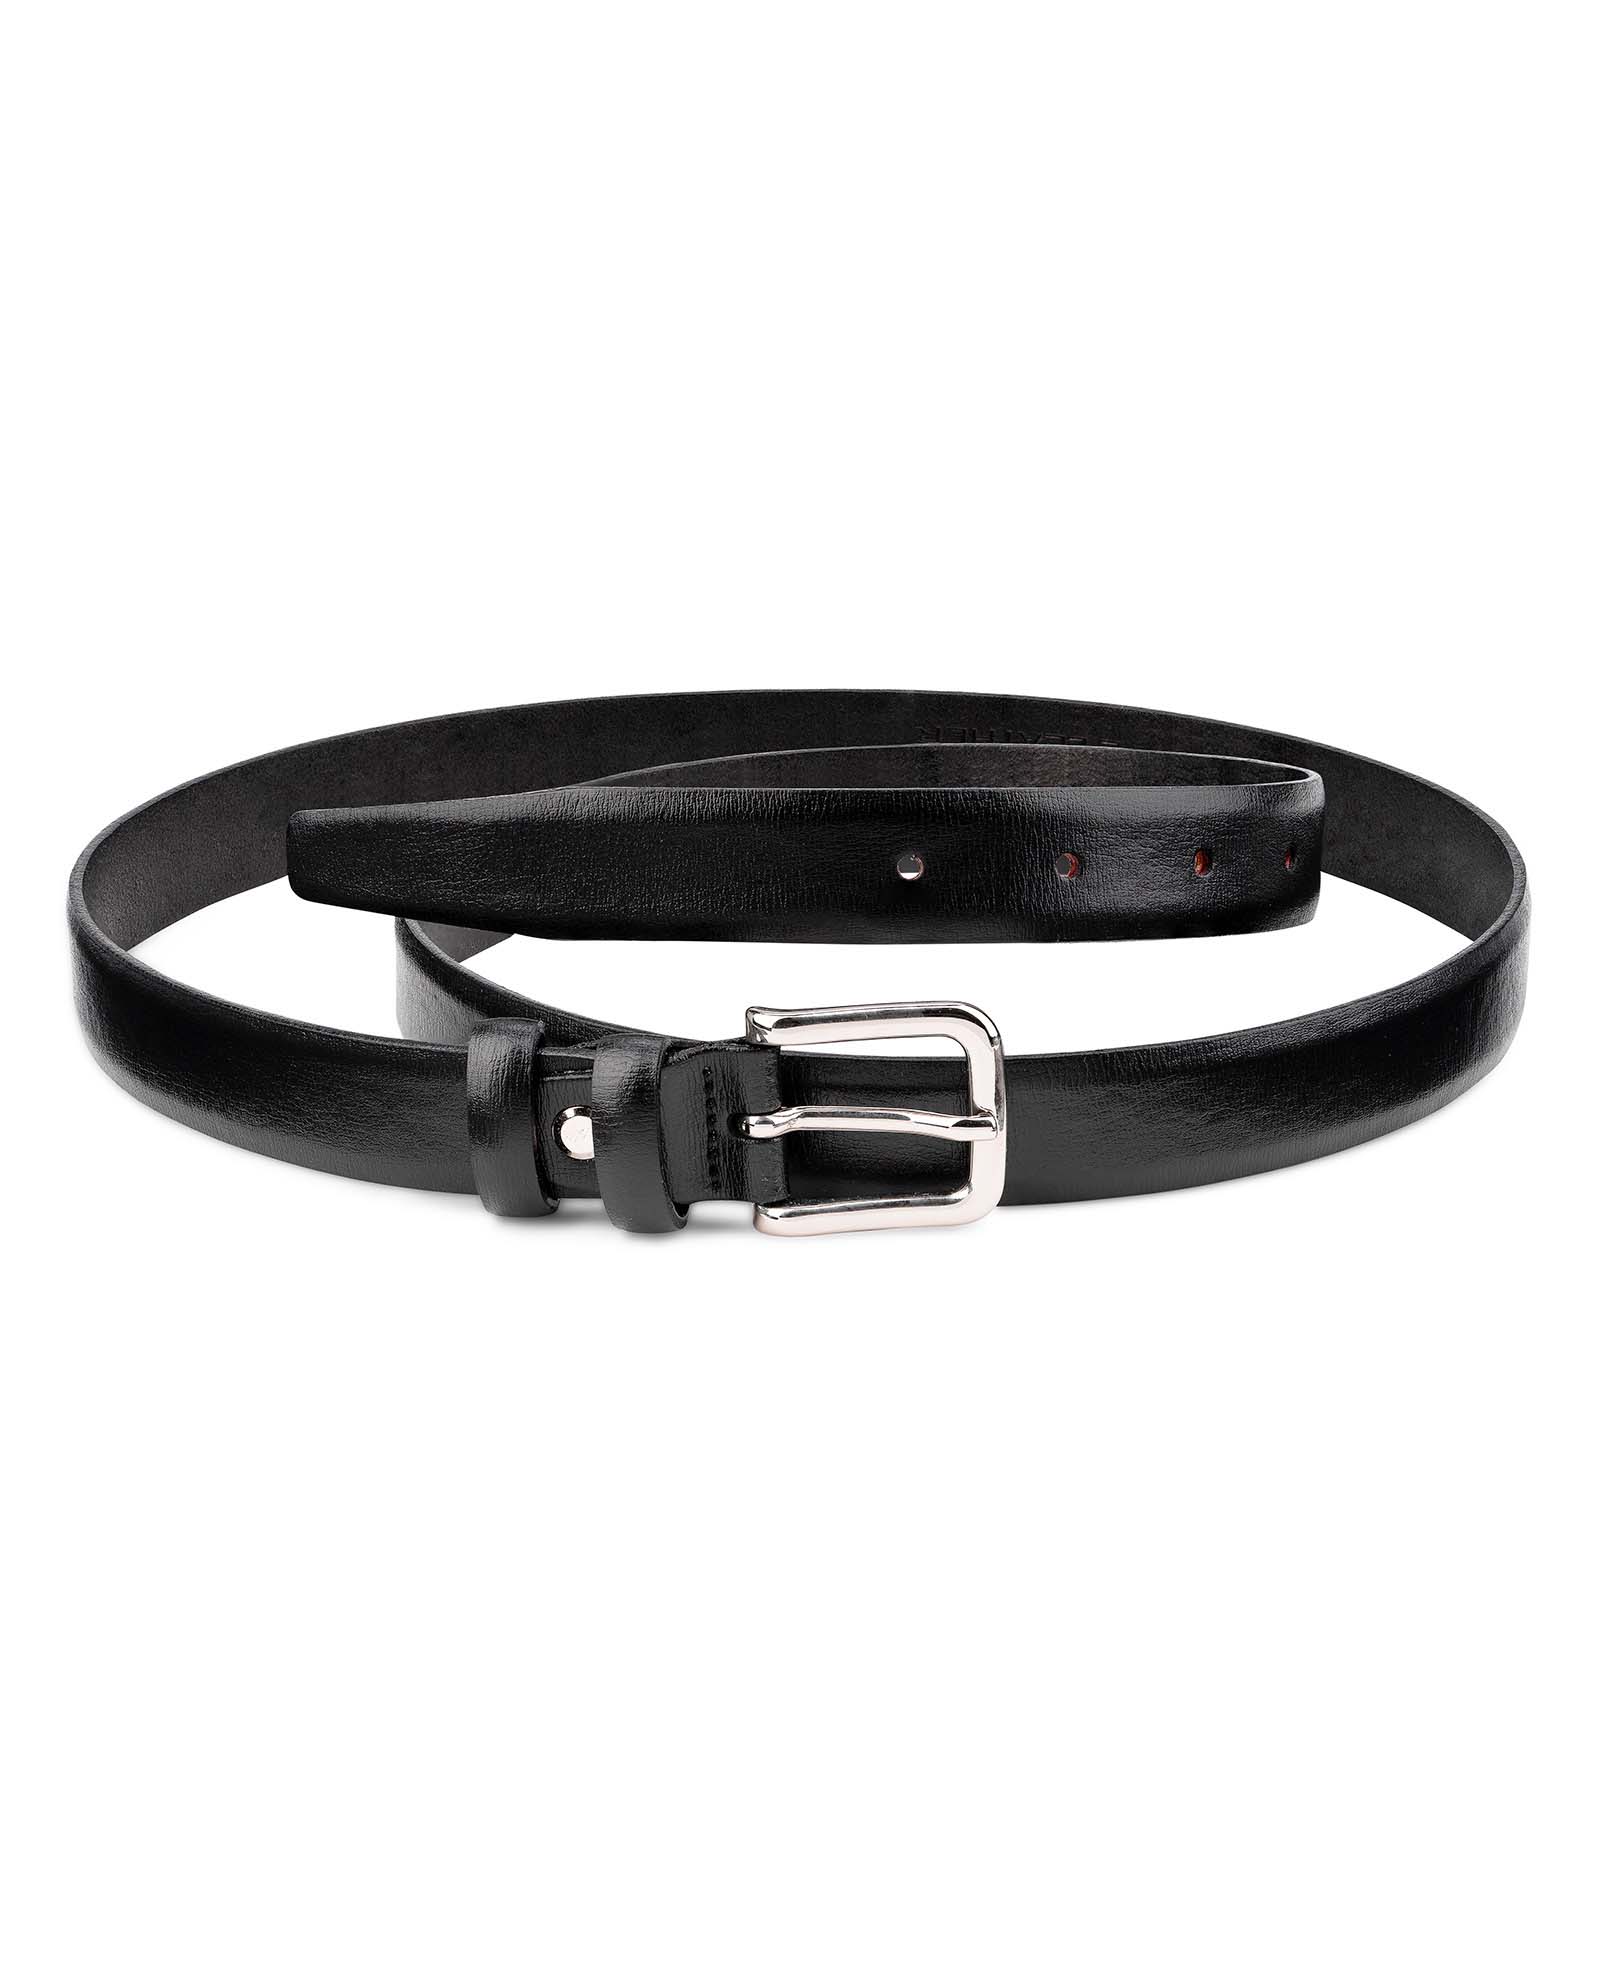 Thin Leather Belt Strap with Smooth Grain Finish 1 Wide with Snaps 